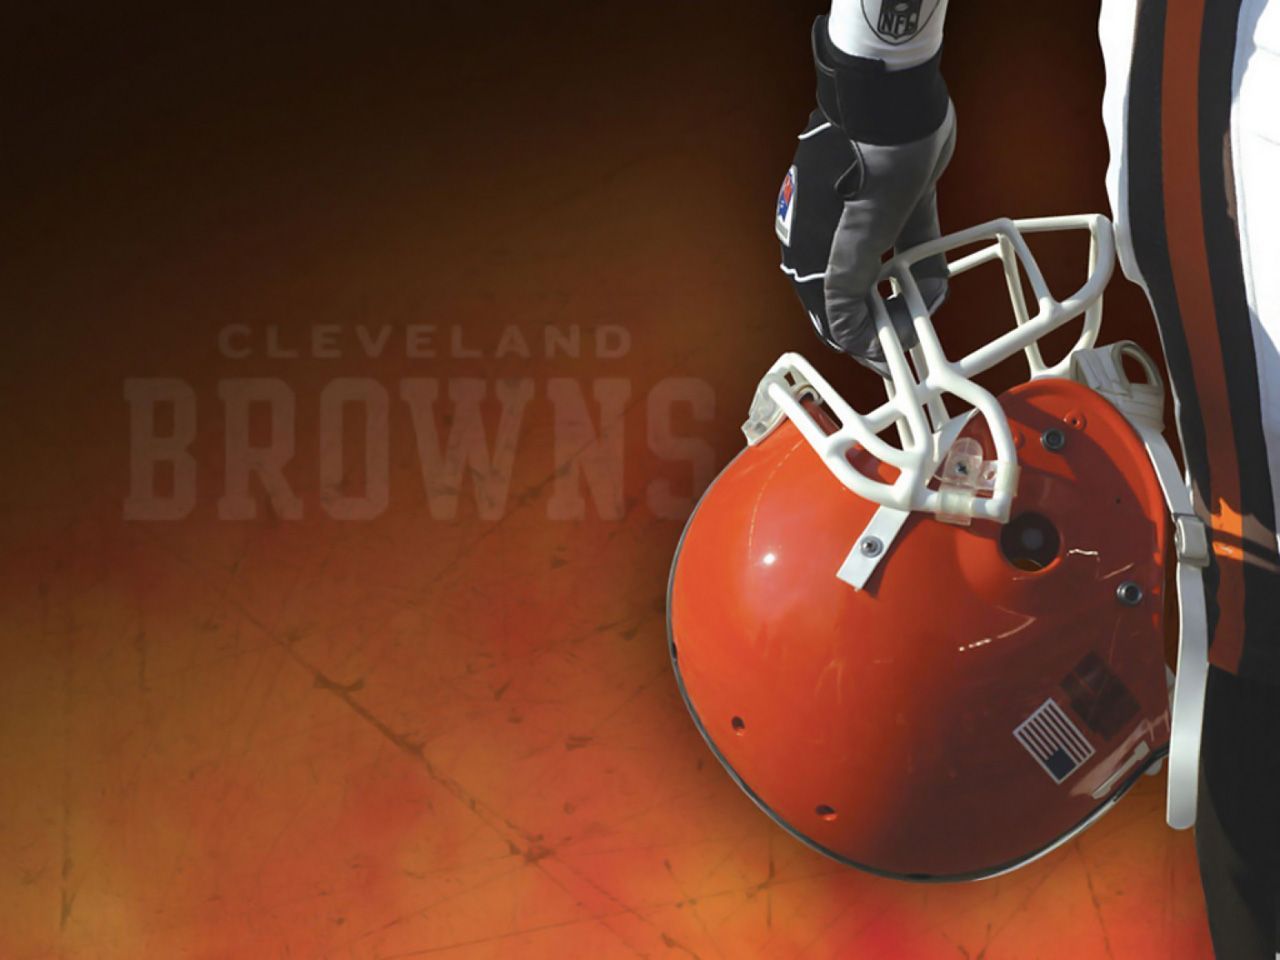 Cleveland browns wallpapers